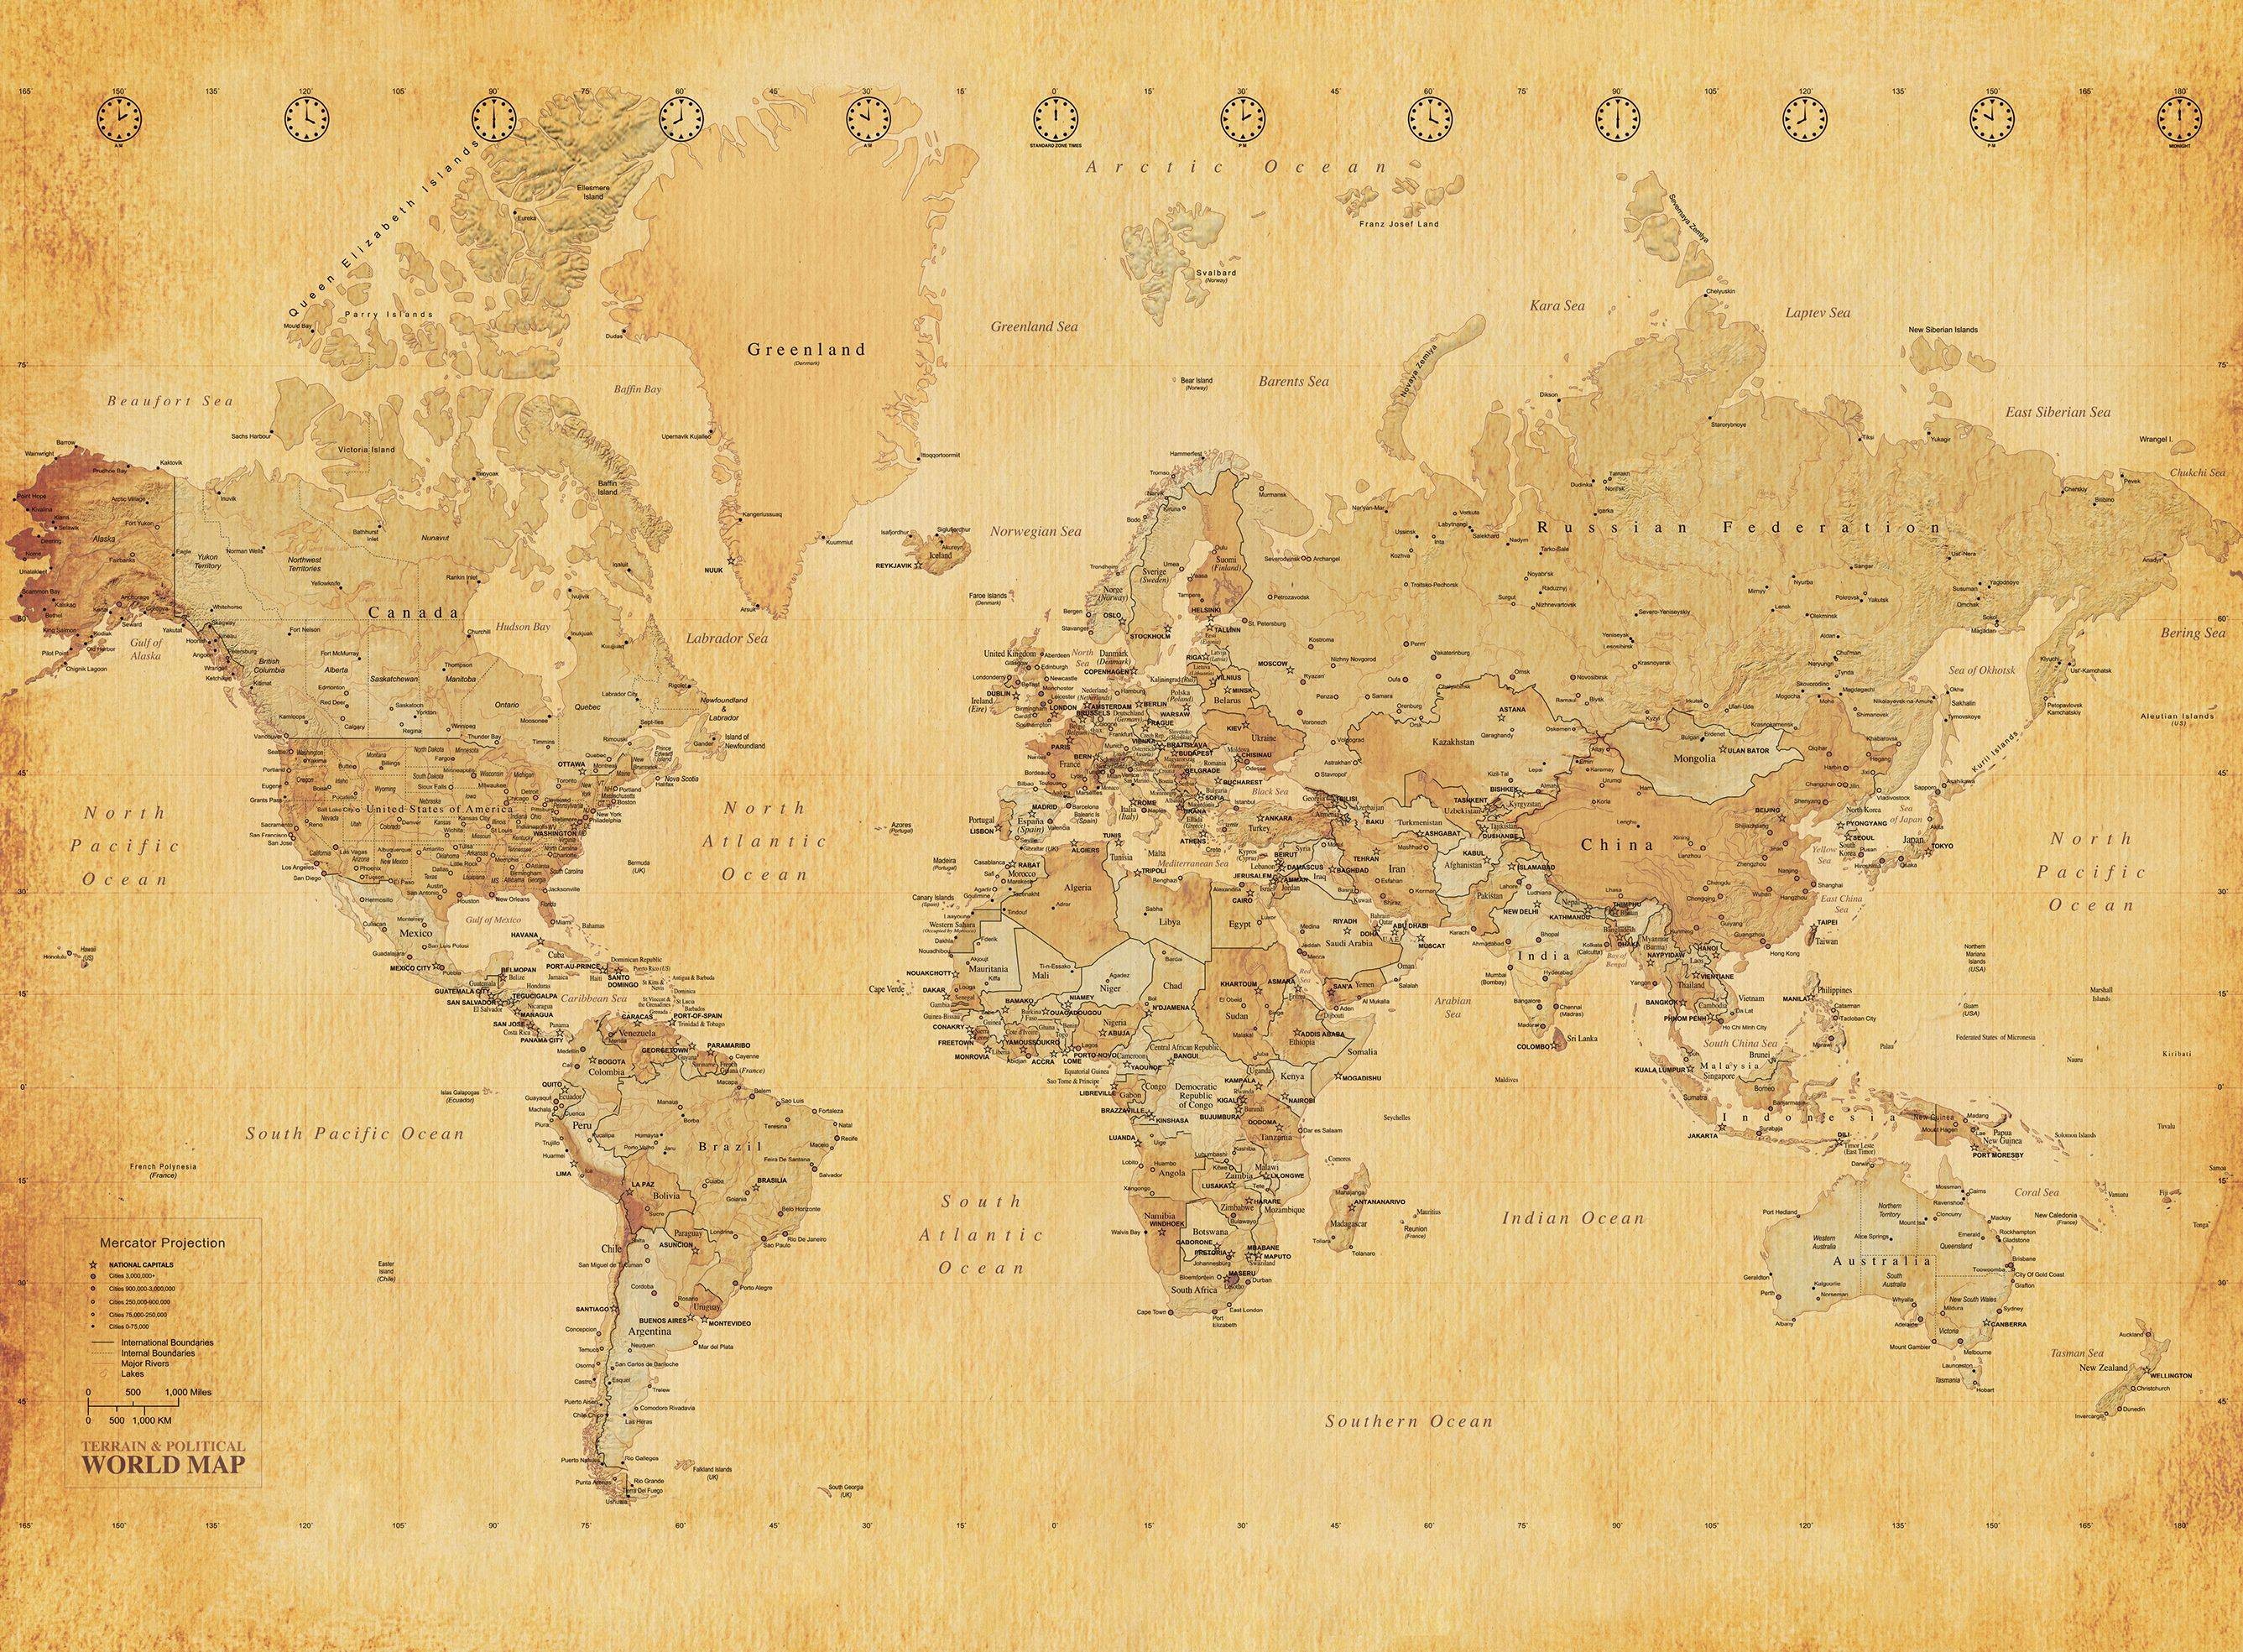 2673x1969 vintage world map wallpaper photo for desktop wallpaper background on other  category similar with 1920x1080 black